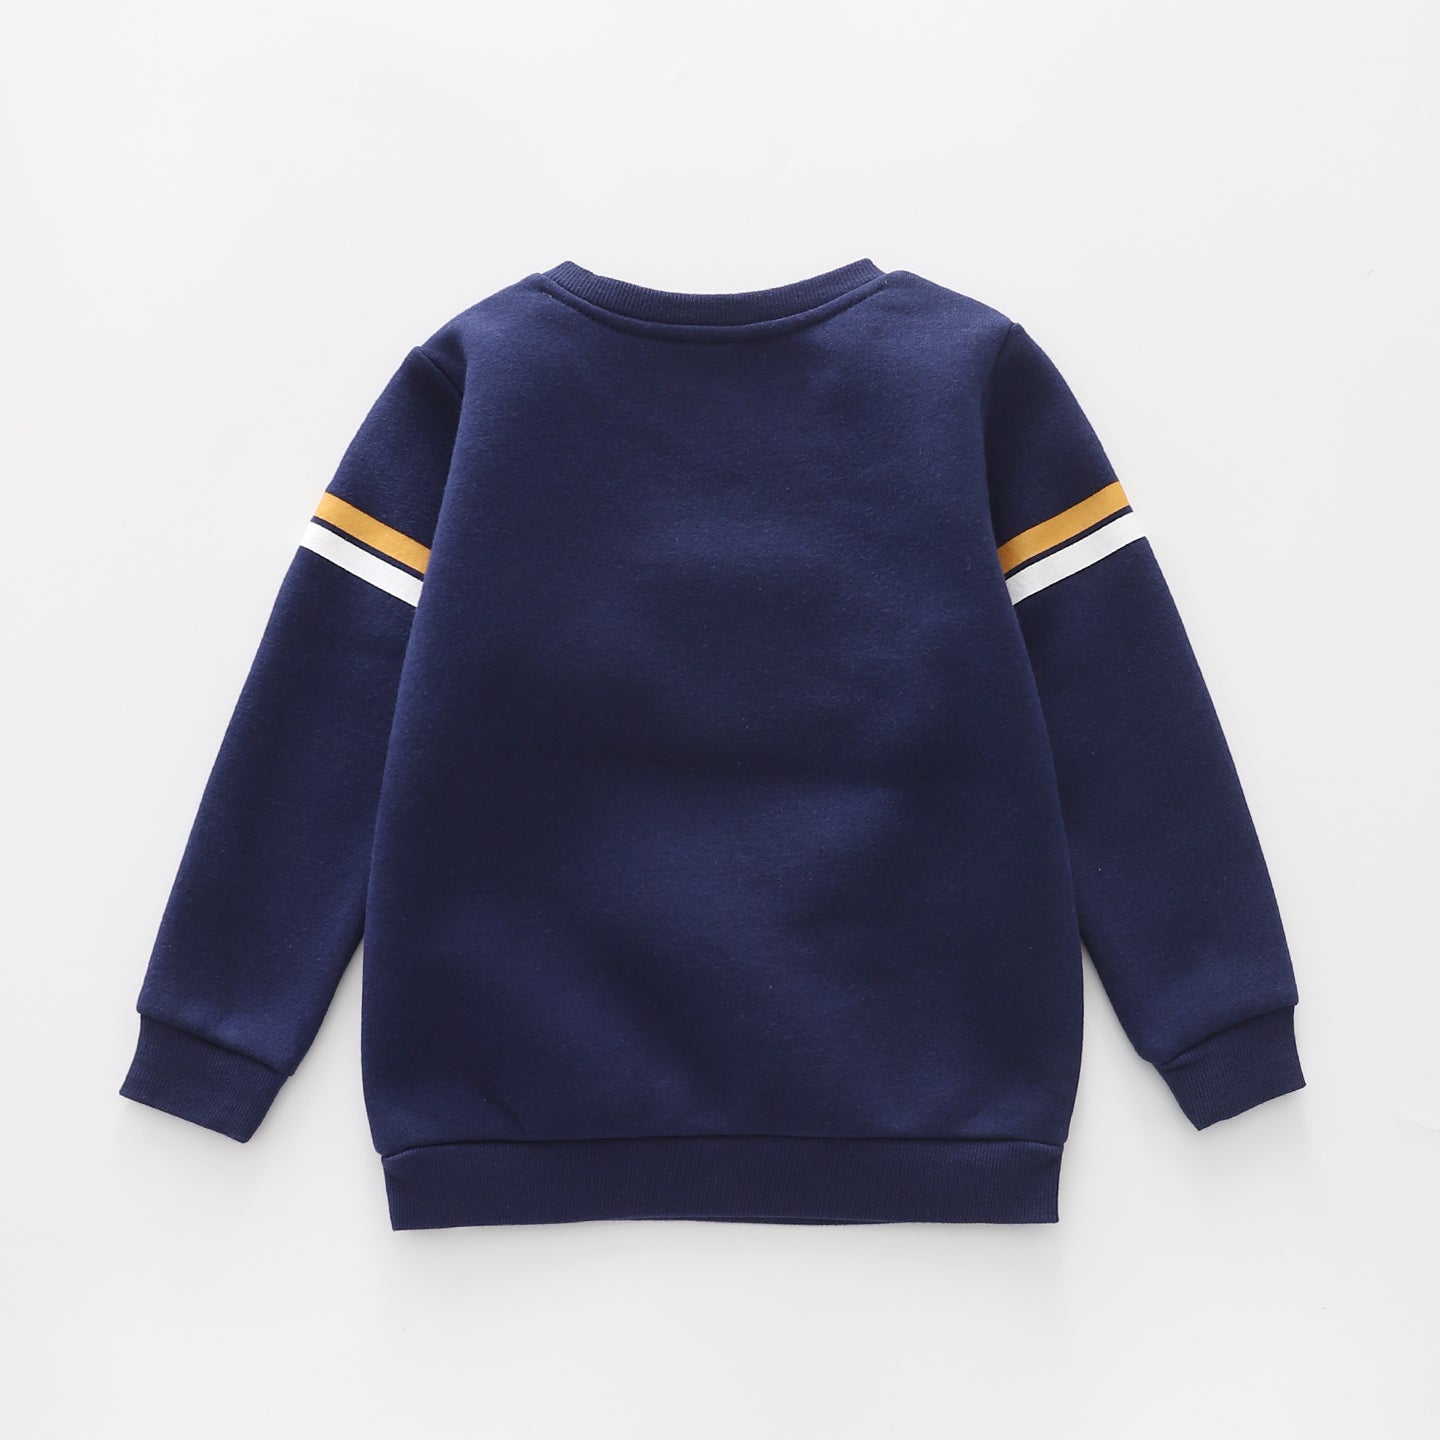 Best of the Bunch, Infant Boys Sweat Top